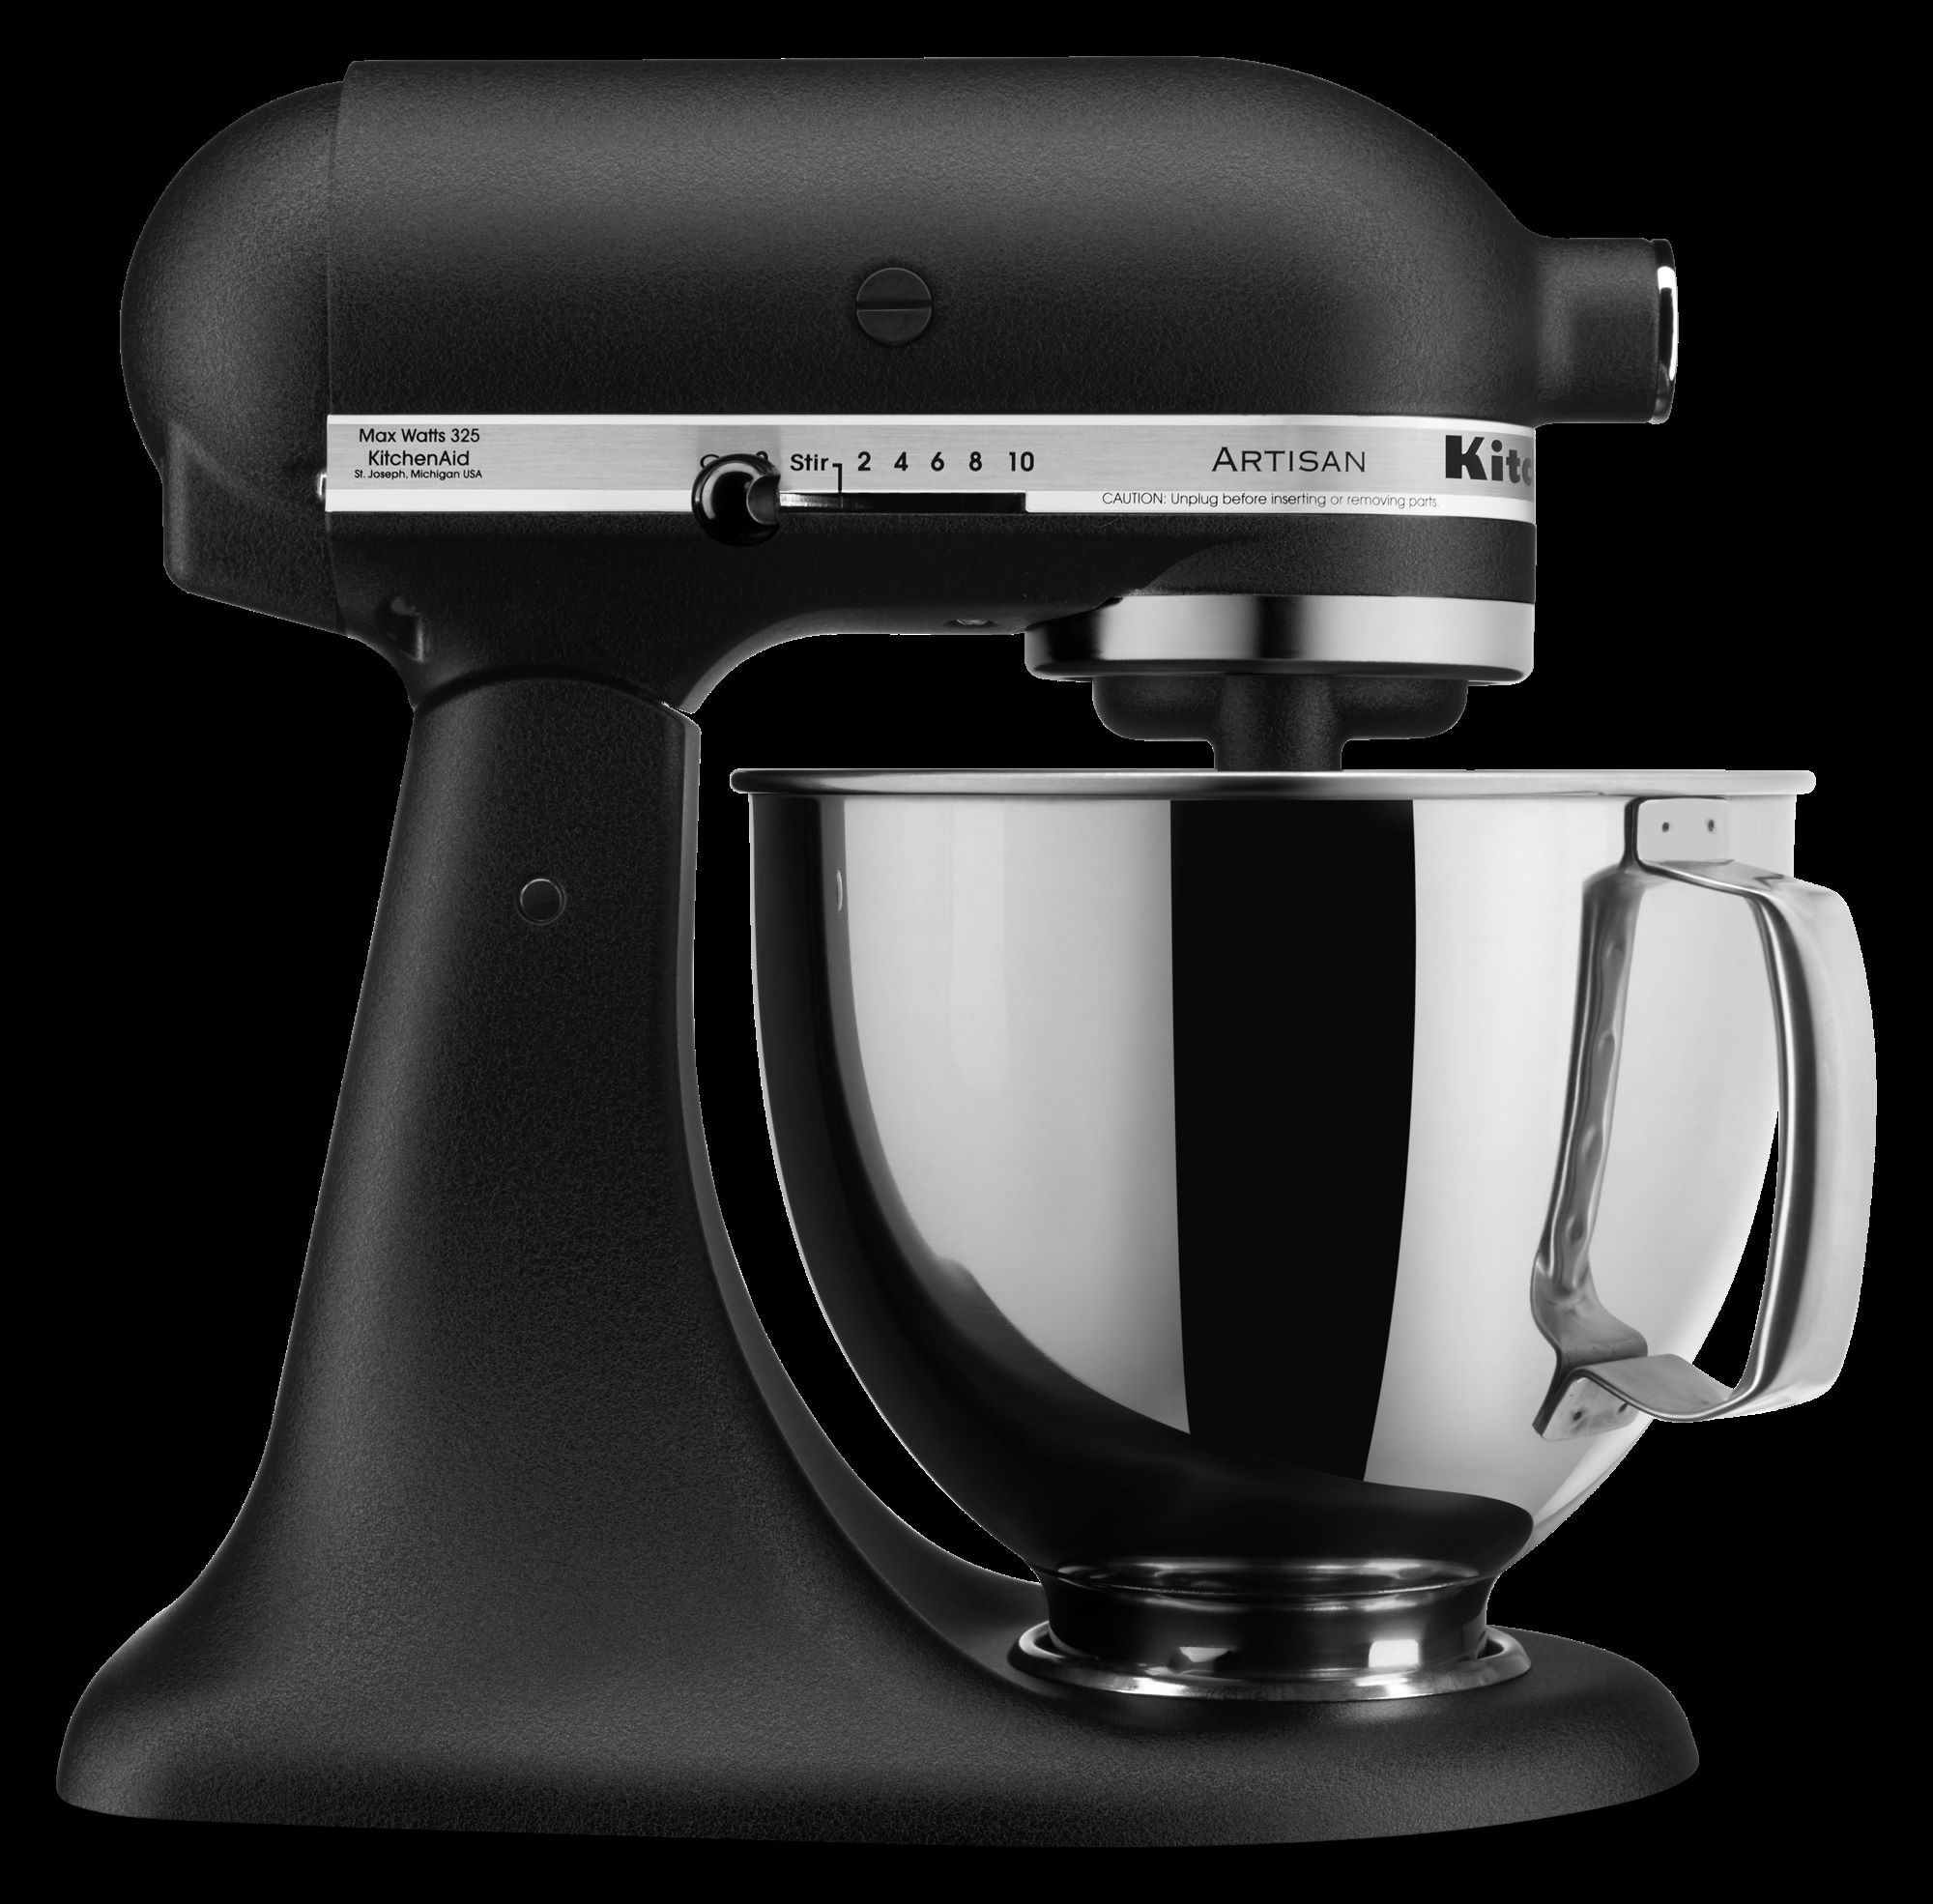 the KitchenAid Residential Series 5-Quart Artisan Mixer department Imperial in Stand Stand Black 10-Speed Mixers at